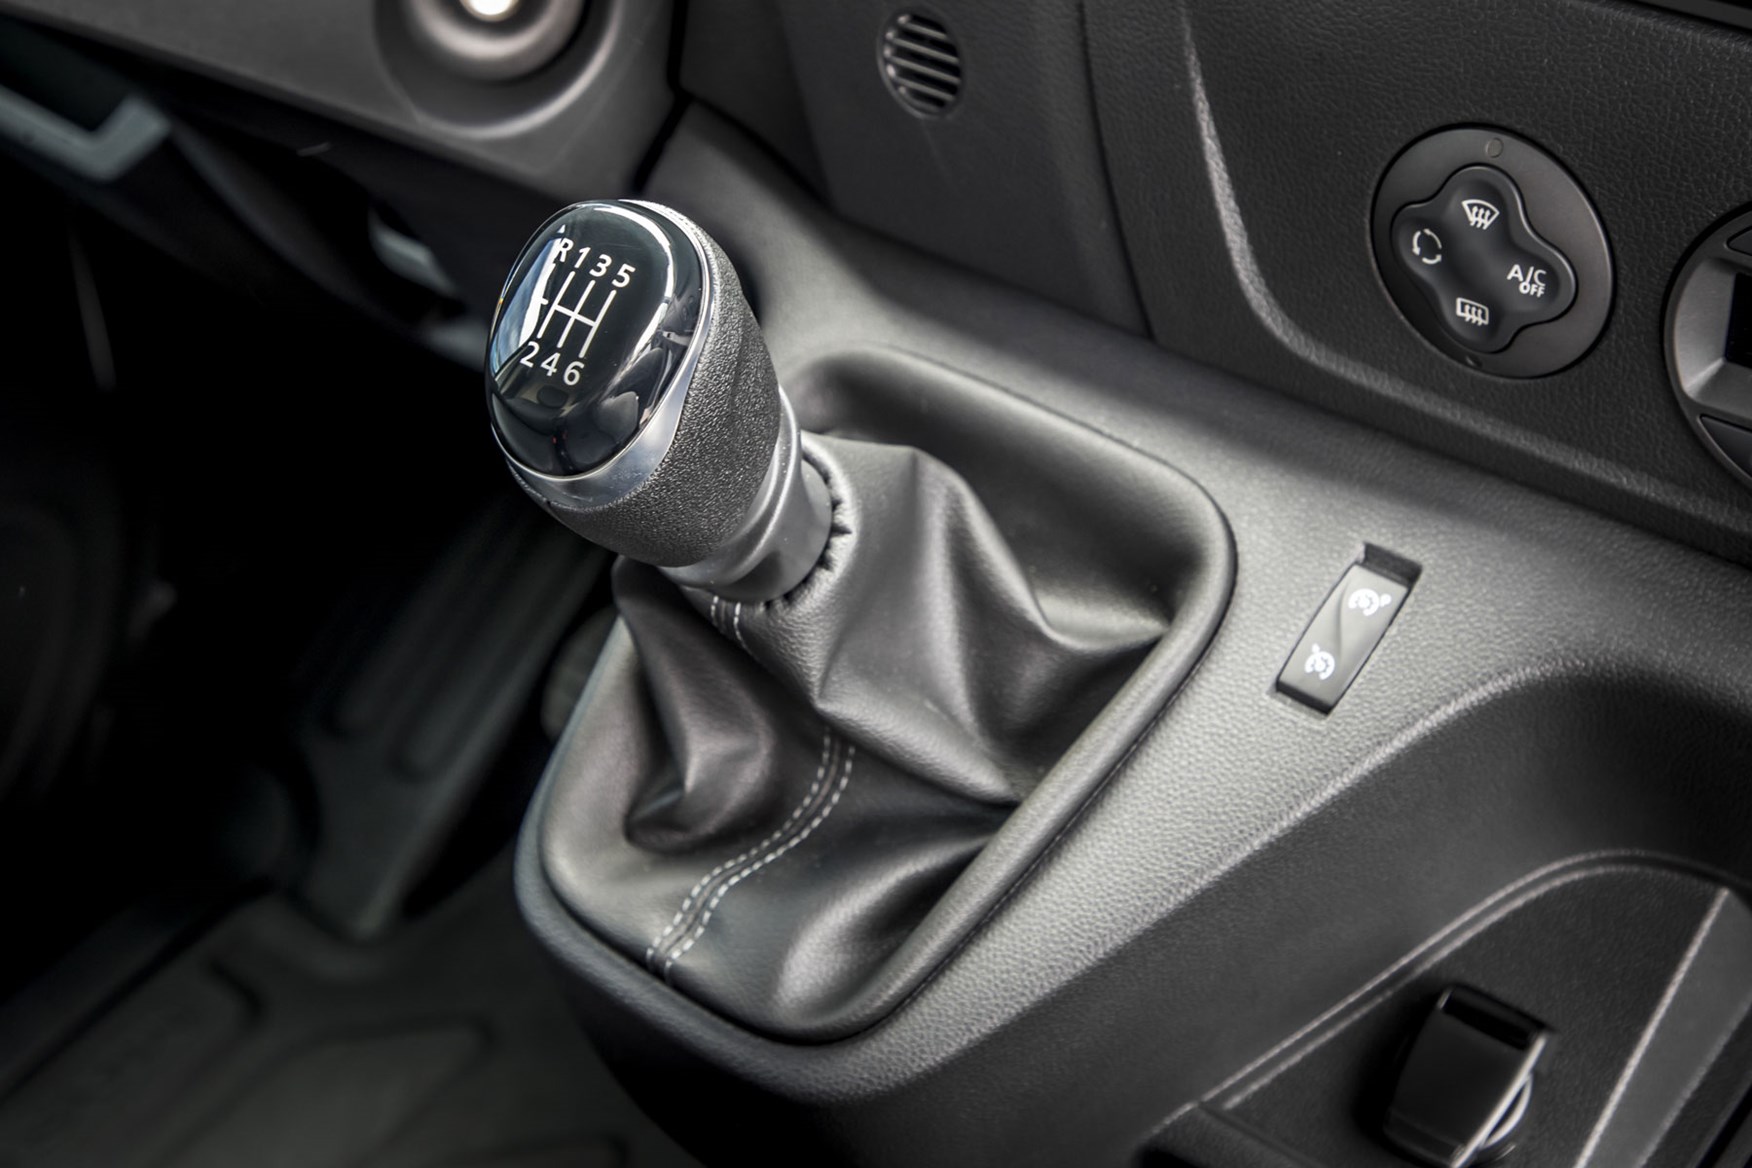 Renault Master review - 2019  facelift model, cab interior showing six-speed manual gearbox